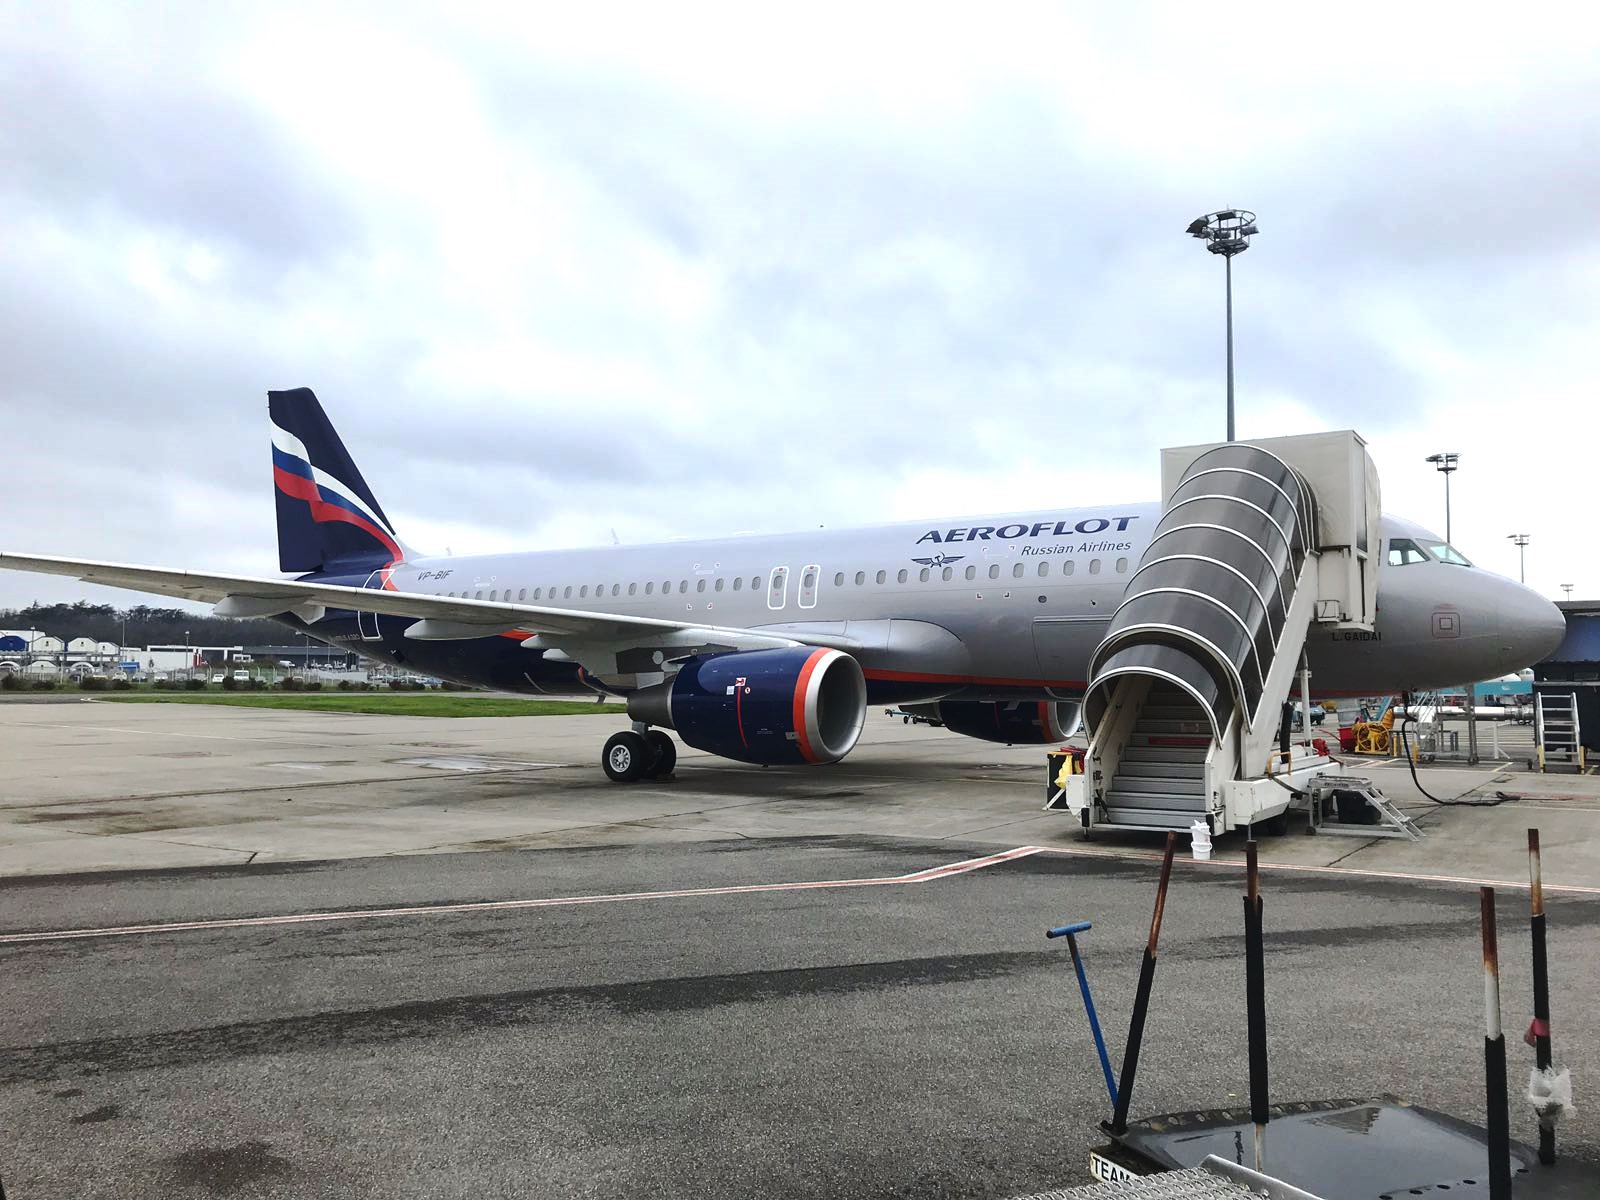 AviaAM Financial Leasing China delivers three A320s to Aeroflot – Russian Airlines